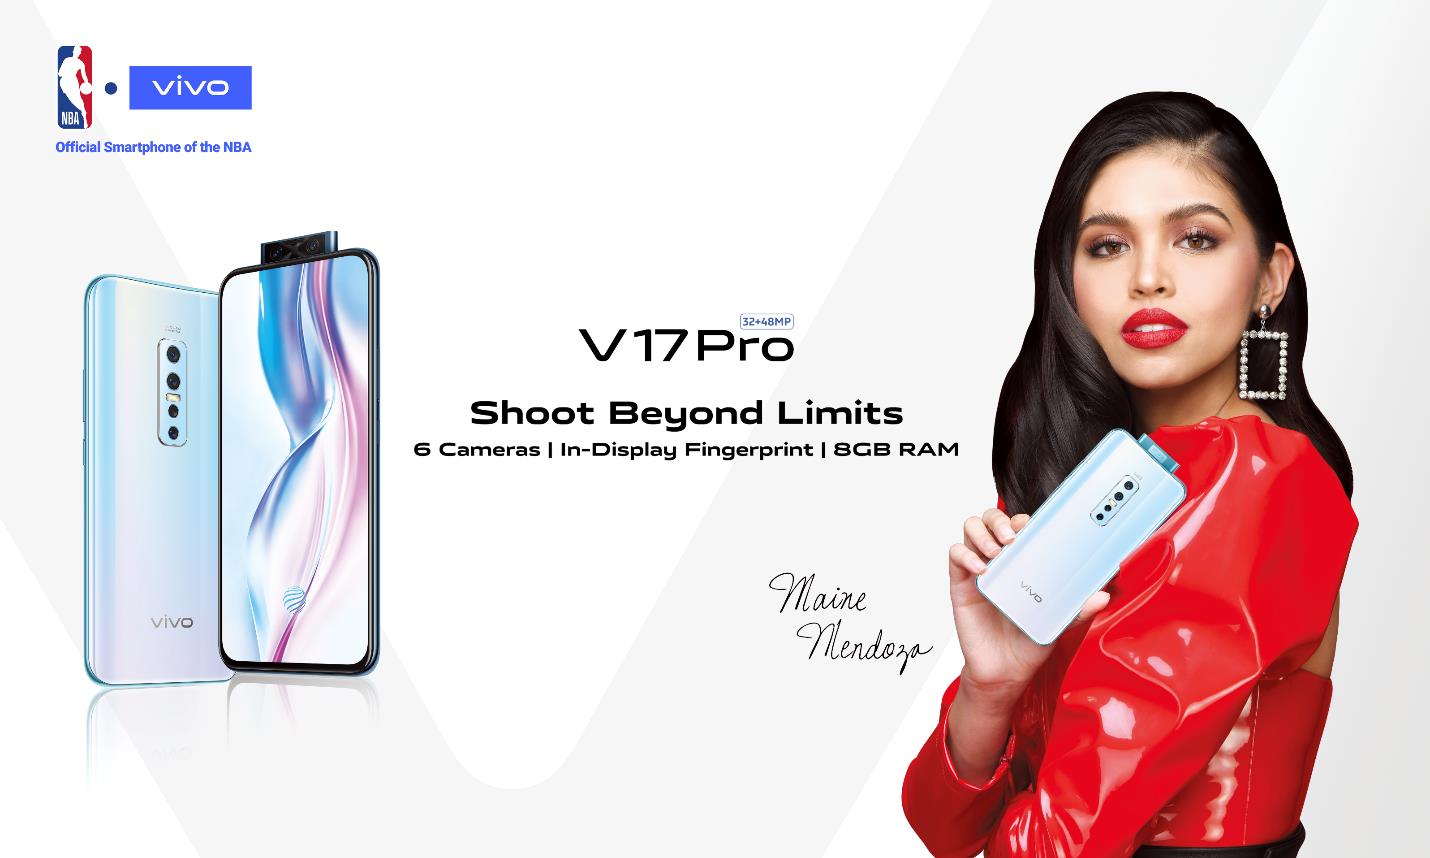 Vivo V17 Pro Comes with 6 Cameras To Shoot Beyond Limits ...